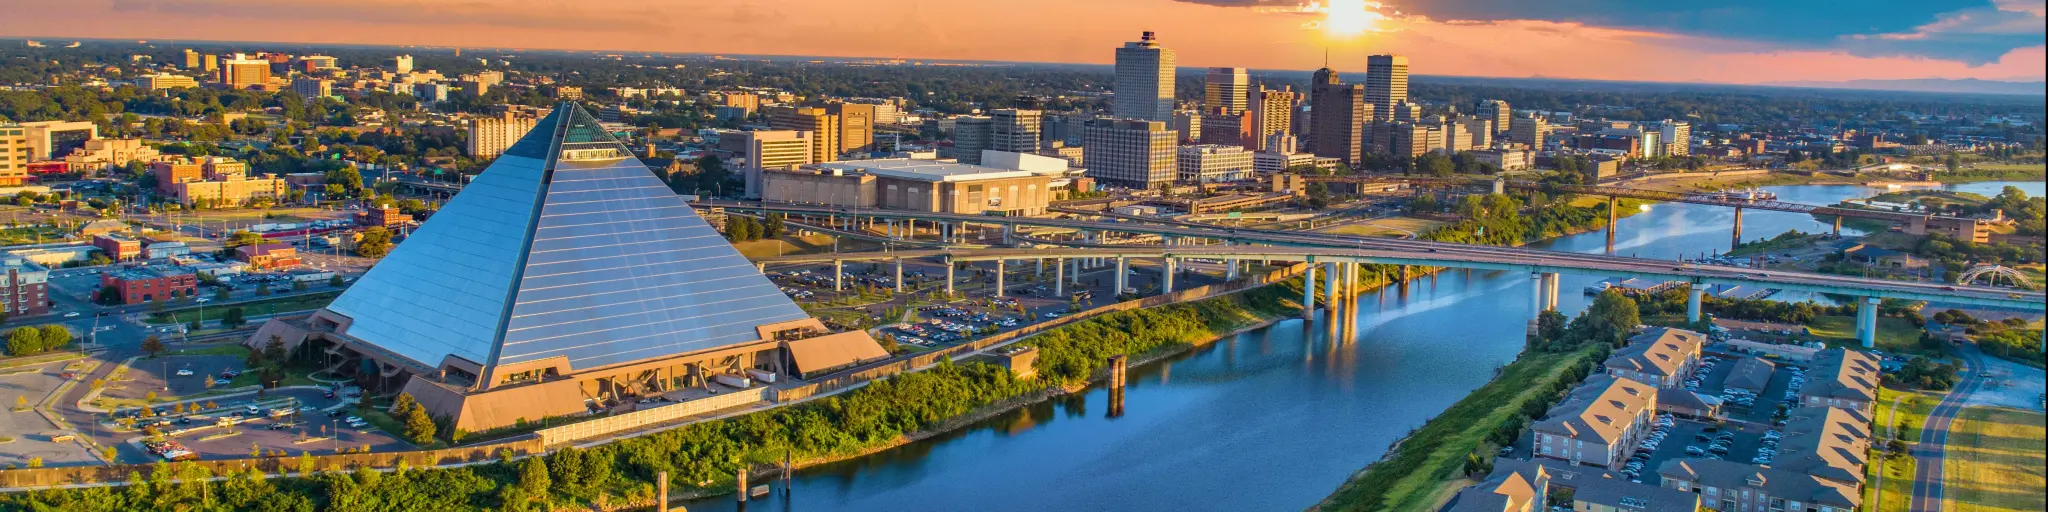 Memphis, Tennessee, USA Downtown Skyline. Aerial photo taken at sunset. 